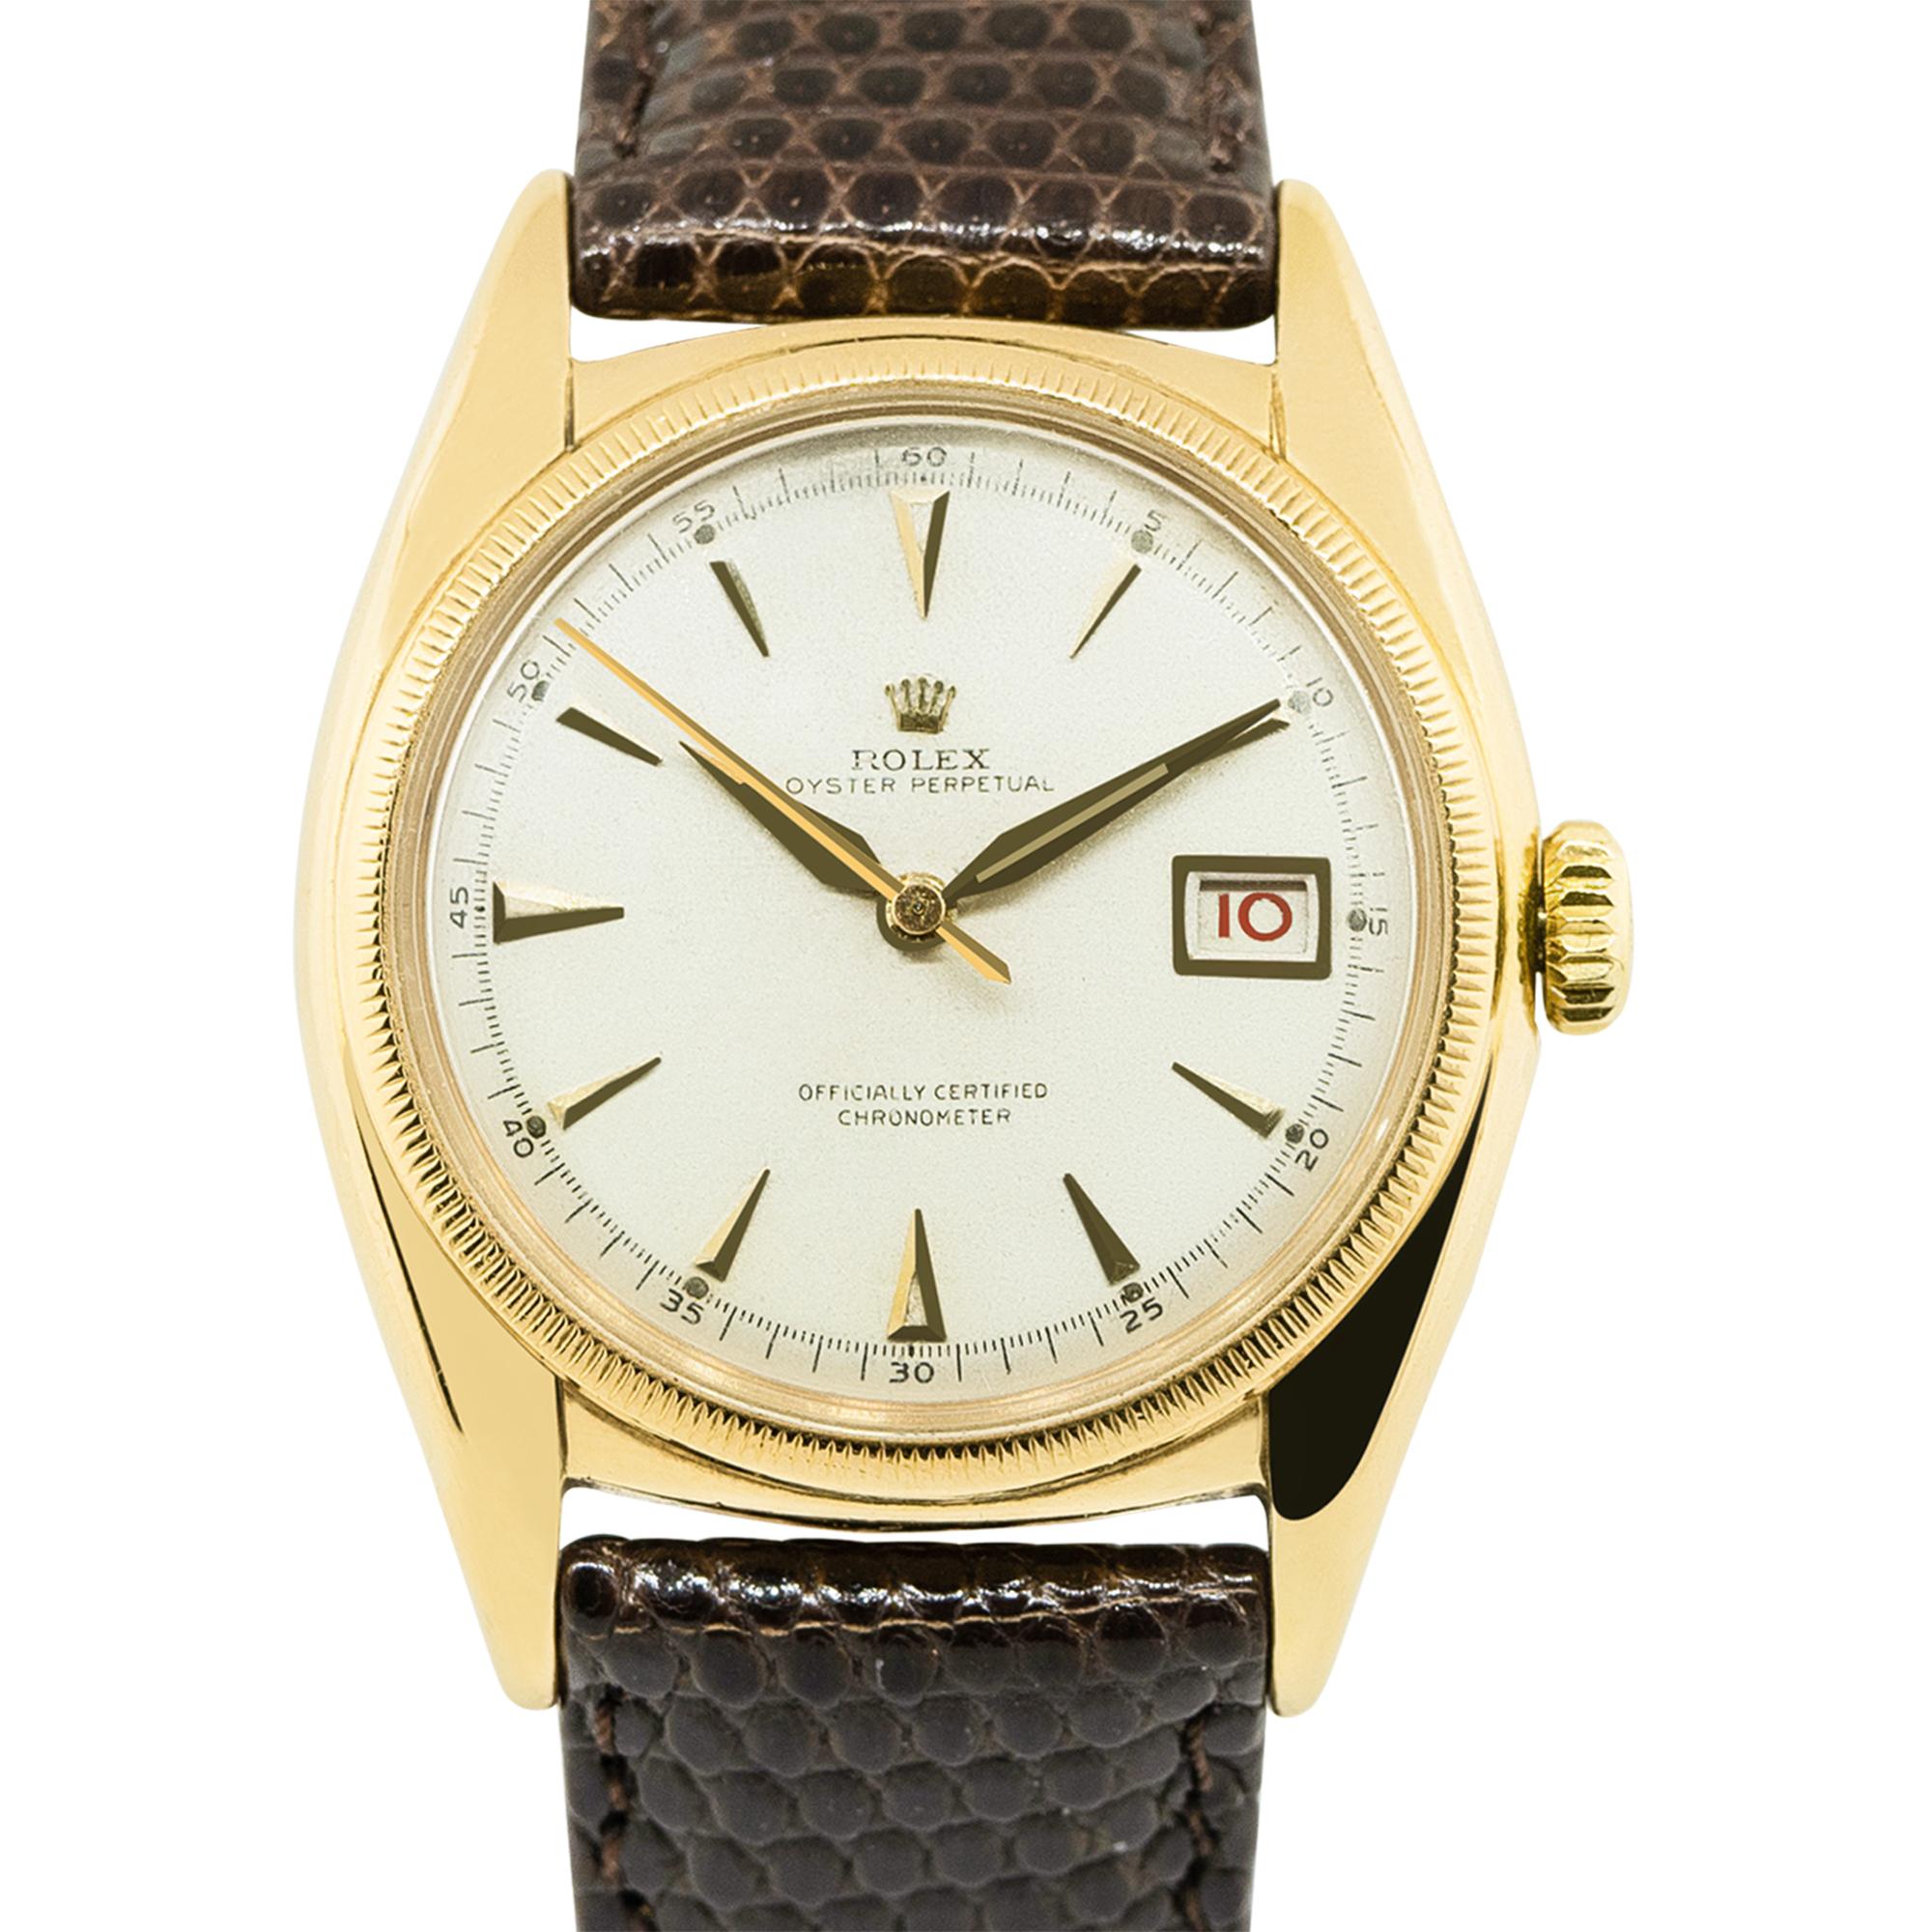 Rolex 6075 Bubble Back 18k Yellow Gold Vintage Watch
Brand: Rolex
Style: Oyster Perpetual Bubble Back
MPN: 6075
Serial Number: 600,000 Serial (From the 1950's)
Case Material: 18k Yellow Gold
Case Diameter: 36mm
Bezel: 18k Yellow Gold Fluted